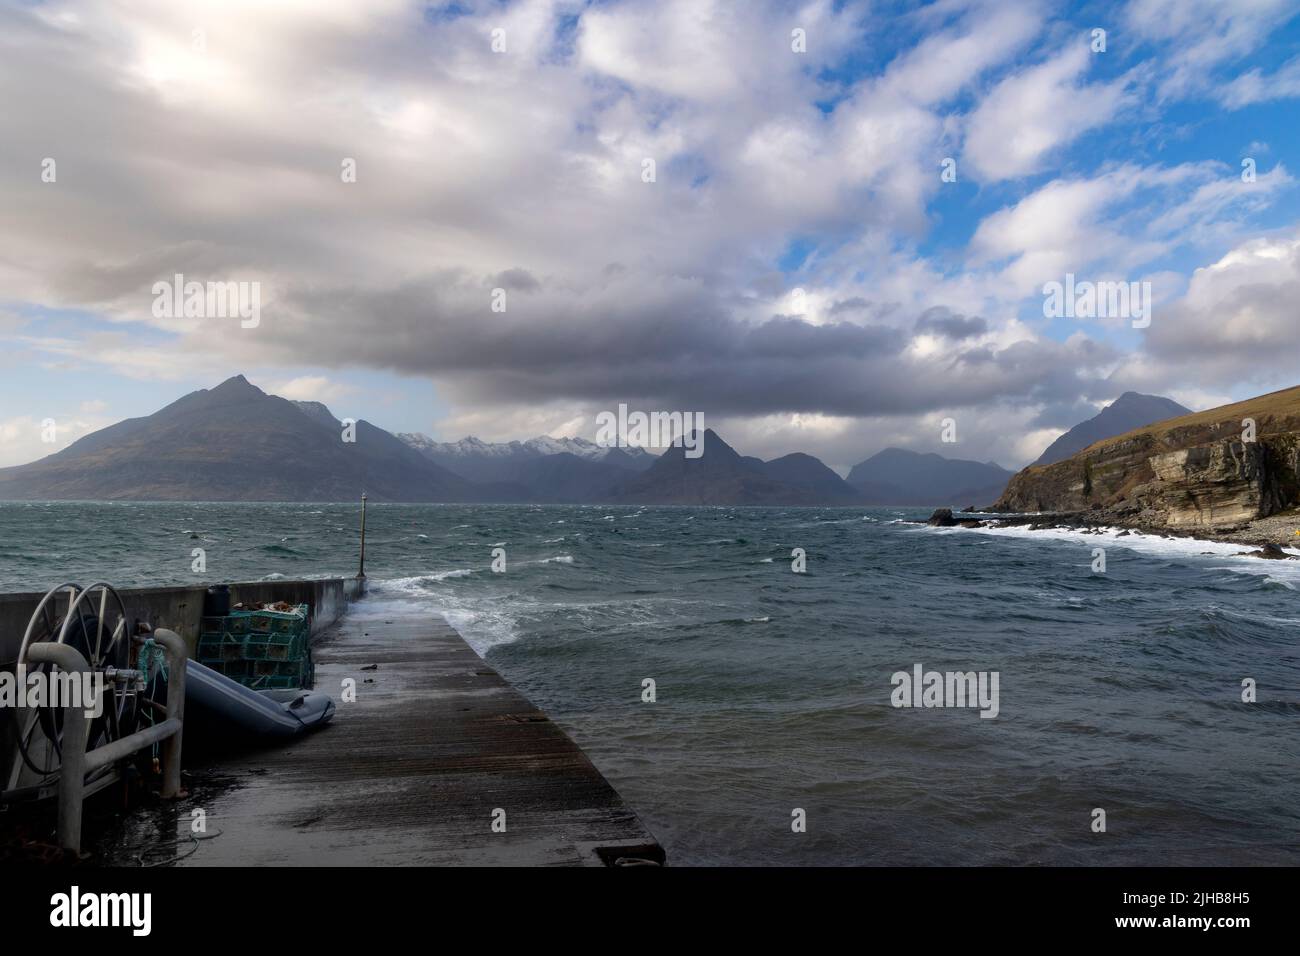 The View from Elgol across Loch Scavaig towards the Cuillins Mountains, Isle of Skye, Scotland Stock Photo